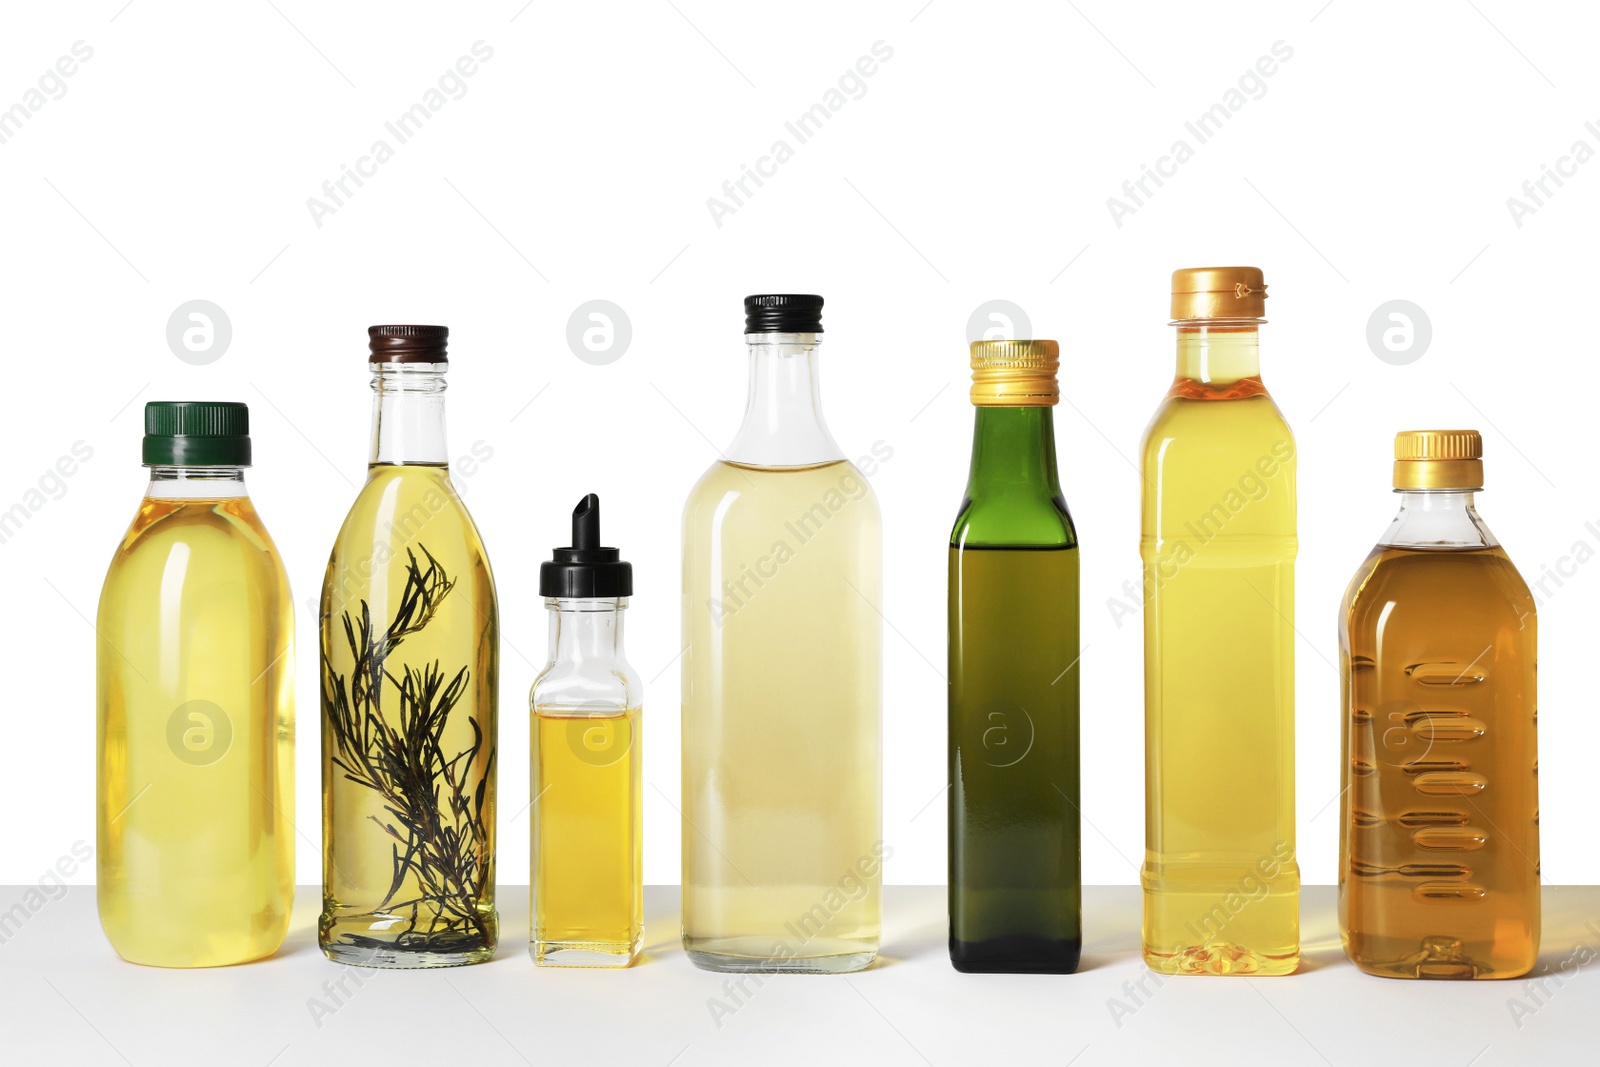 Photo of Bottles of different cooking oils on white background